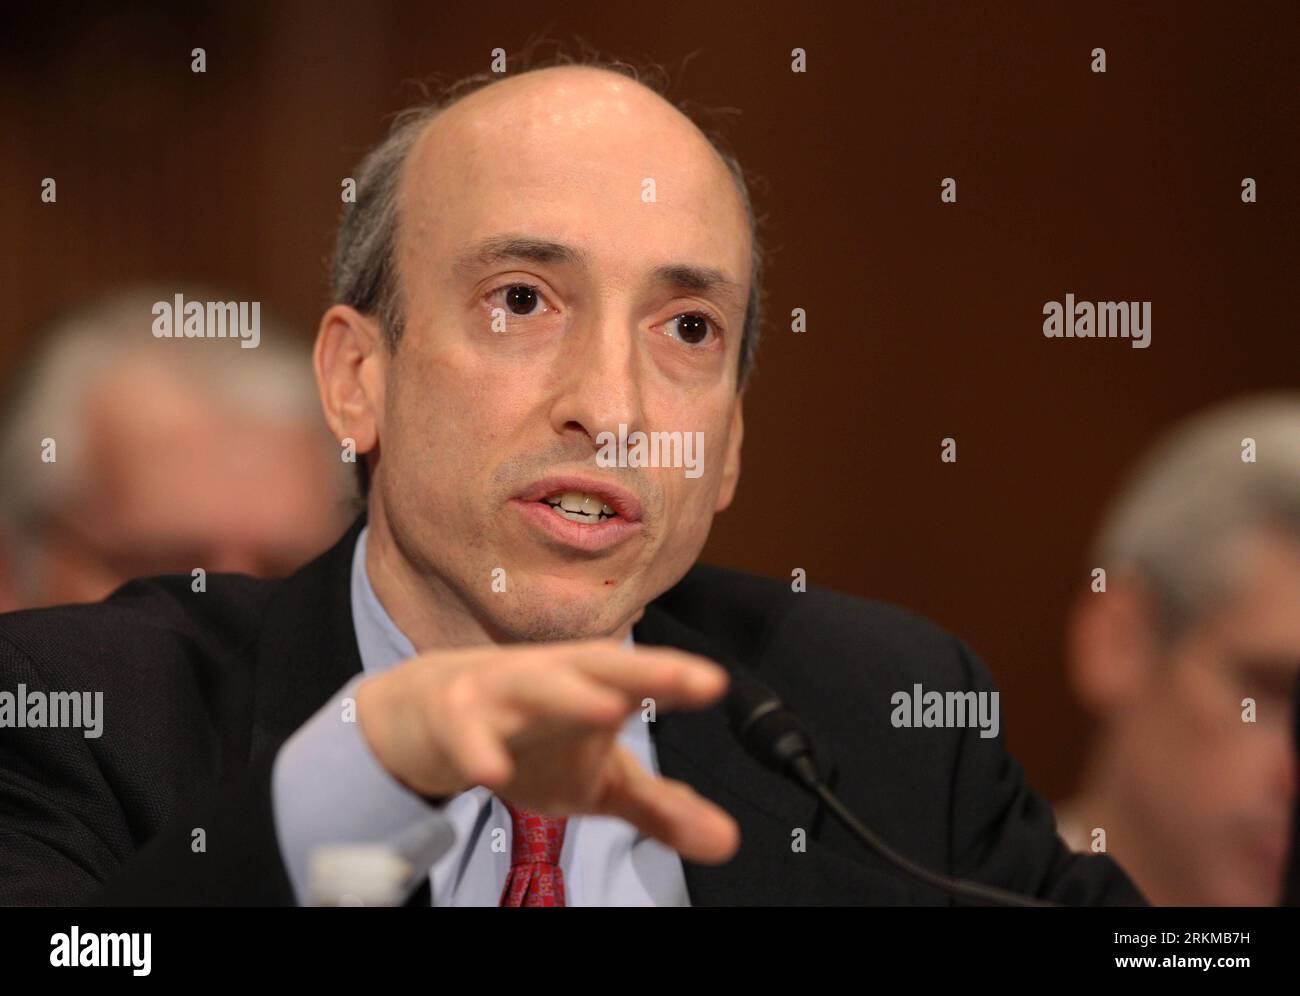 Bildnummer: 56657369  Datum: 06.12.2011  Copyright: imago/Xinhua (111206) -- WASHINGTON, Dec. 6, 2011 (Xinhua) -- Gary Gensler, chairman of the U.S. Futures Commodities Trading Commission (CFTC), speaks during a Senate Banking Committee hearing in Washington, D.C., the United States, Dec. 6, 2011. While the United States has made much progress in the implementation of the Dodd-Frank Act, there is still much work left to strengthen financial regulation after the world s largest economy was hit seriously by the financial crisis, said U.S. financial regulators on Tuesday. (Xinhua/Fang Zhe) US-WAS Stock Photo